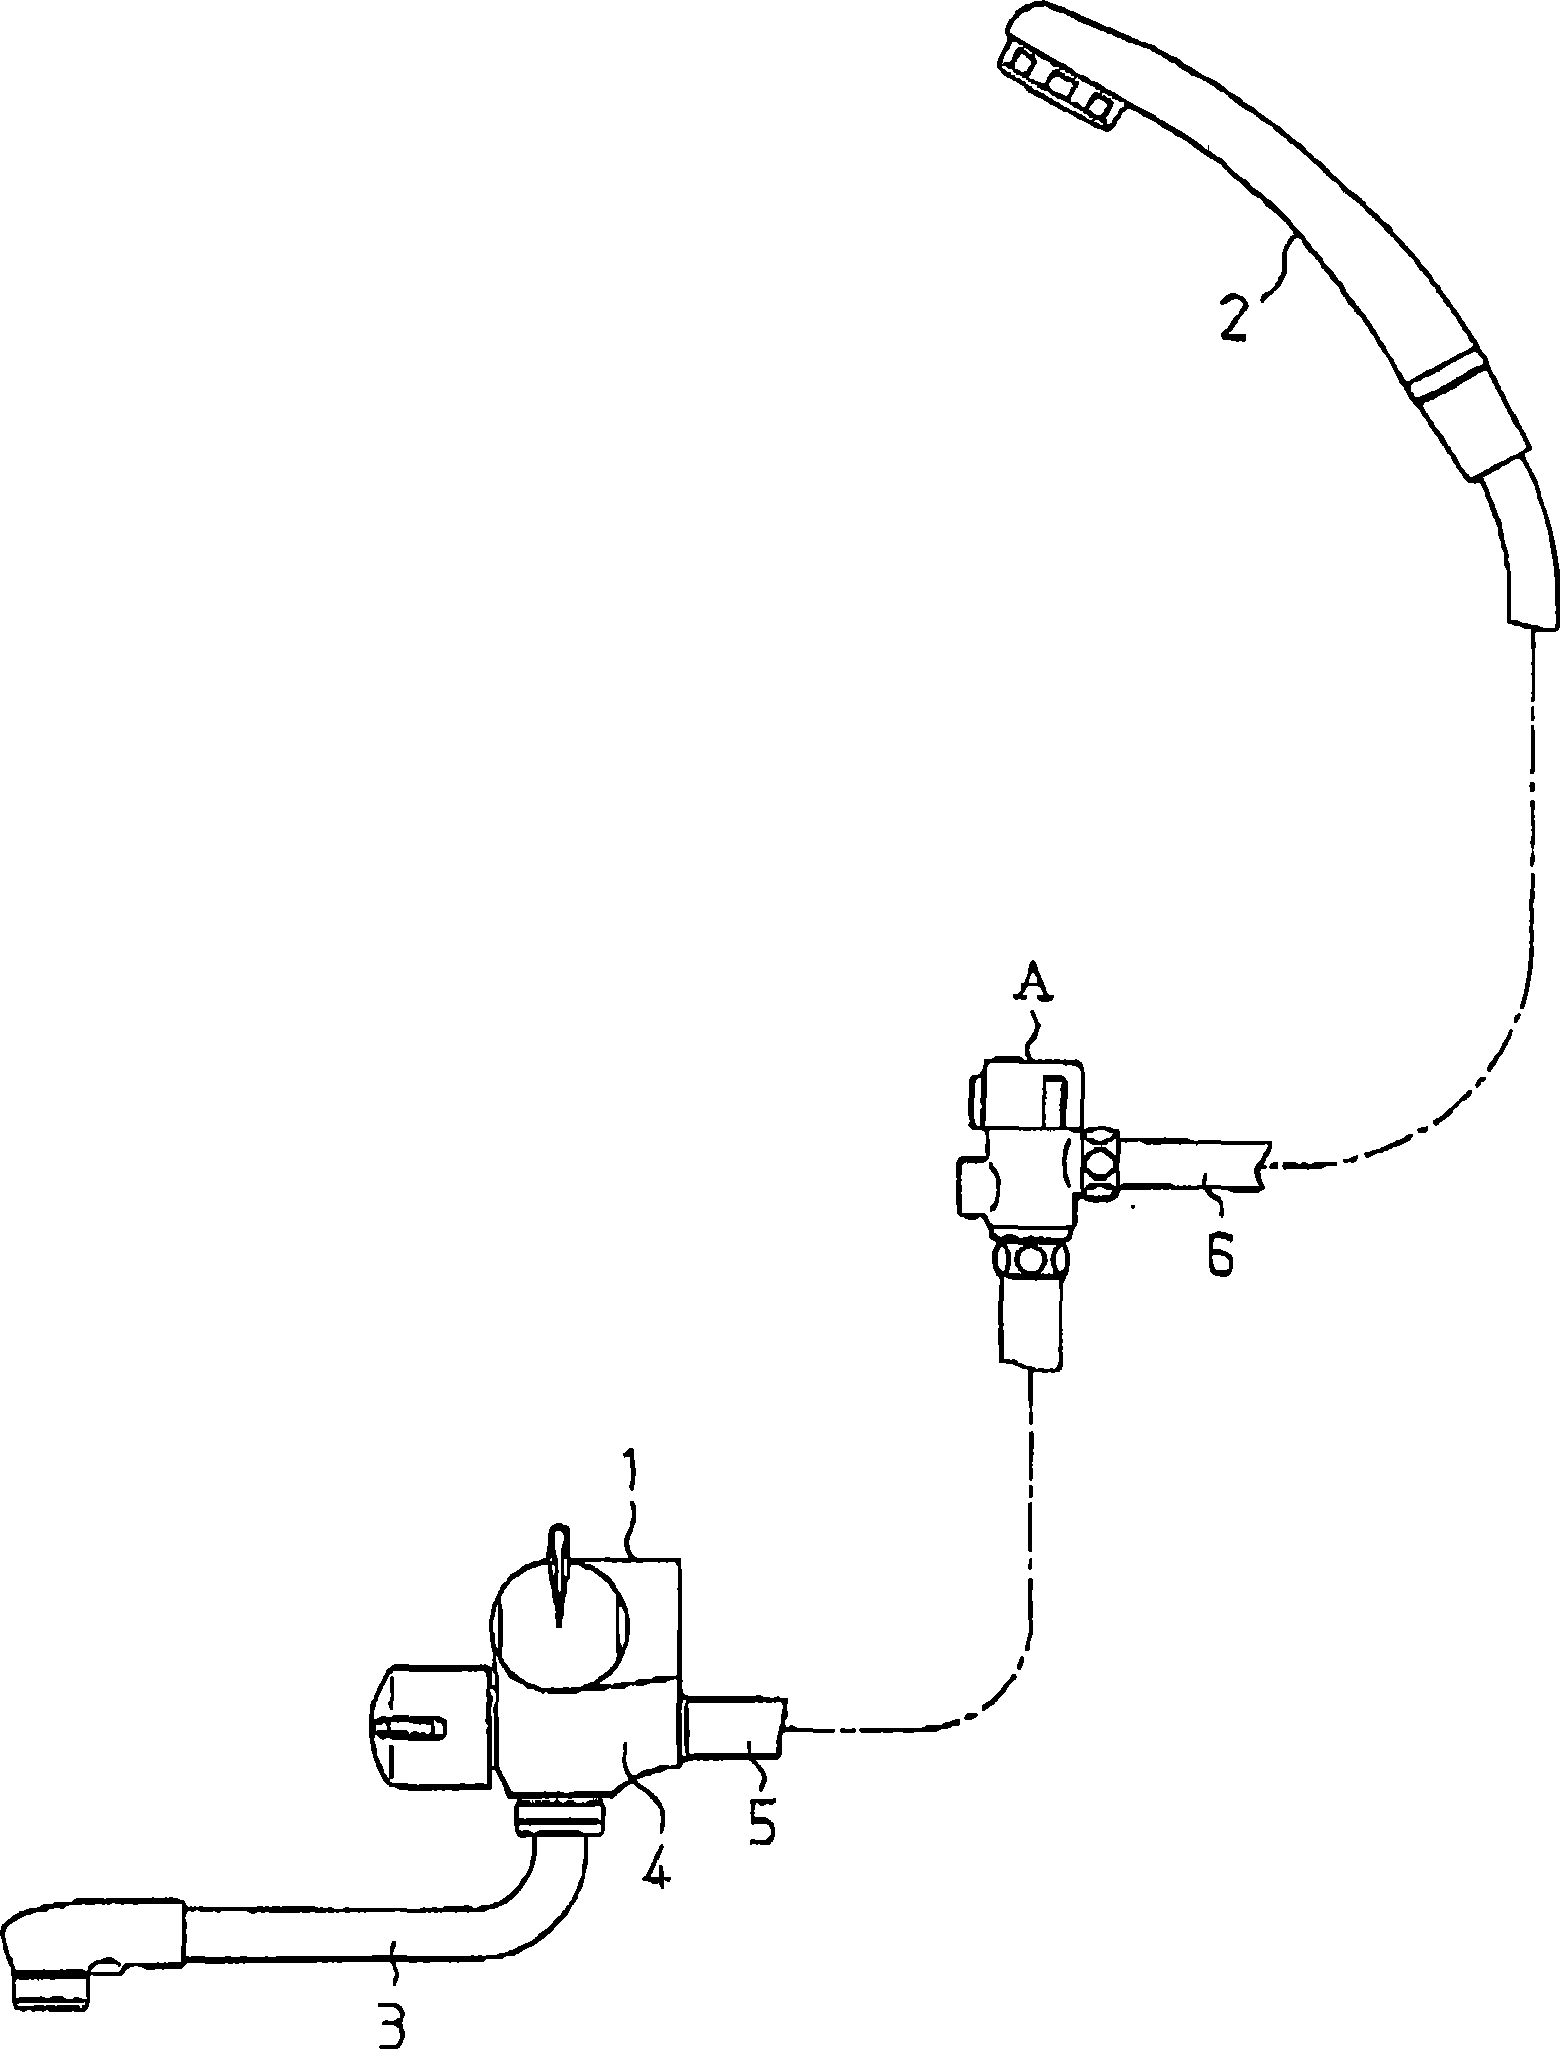 Flow channel switching valve and shower system